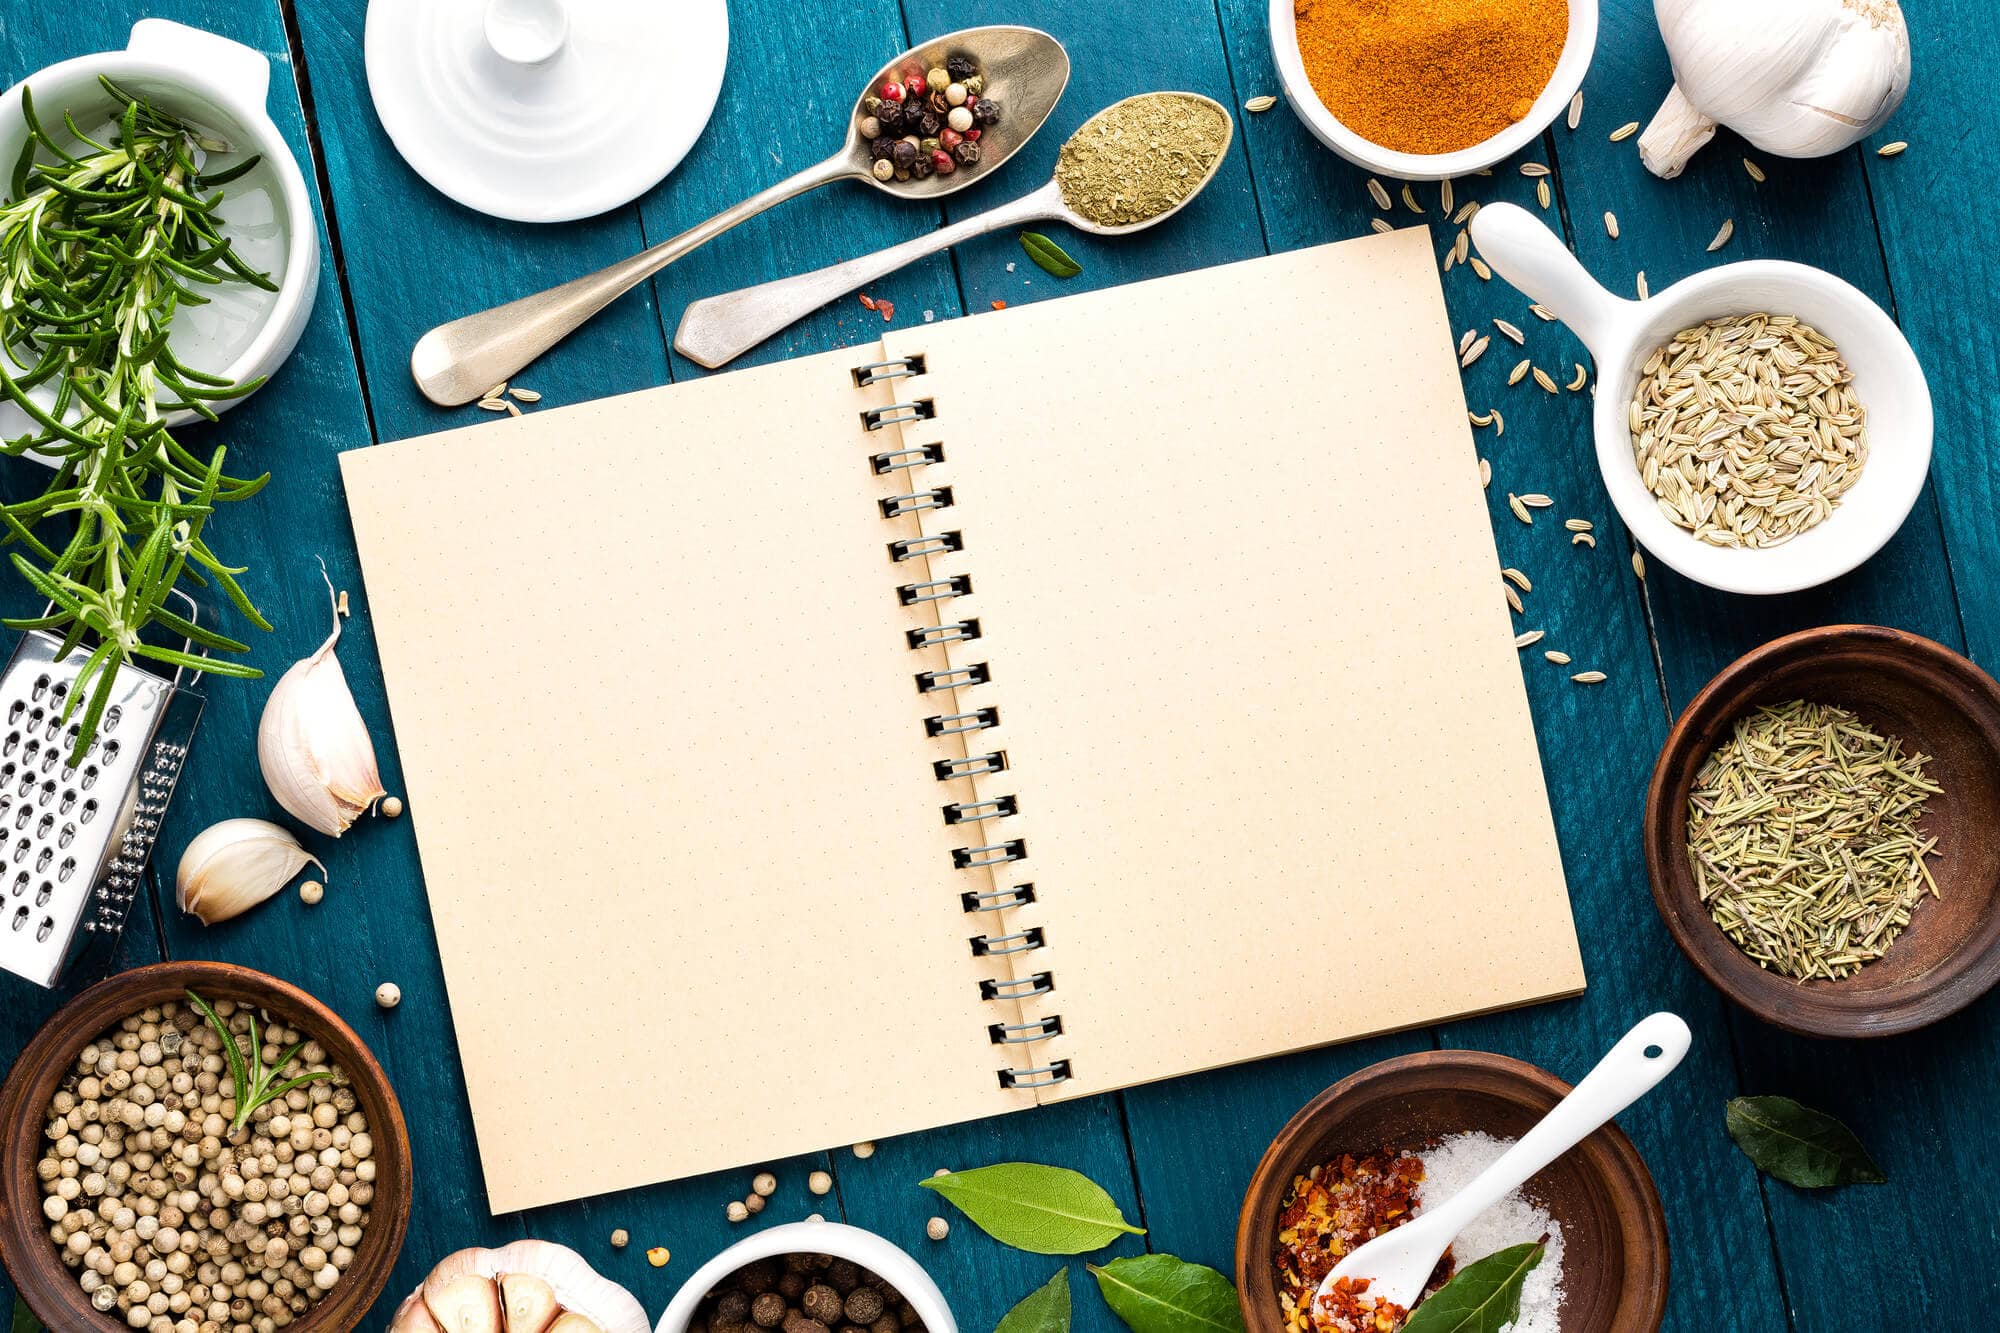 Empty recipe book against a teal wooden background featuring cooking utensils, dishware, herbs and spices